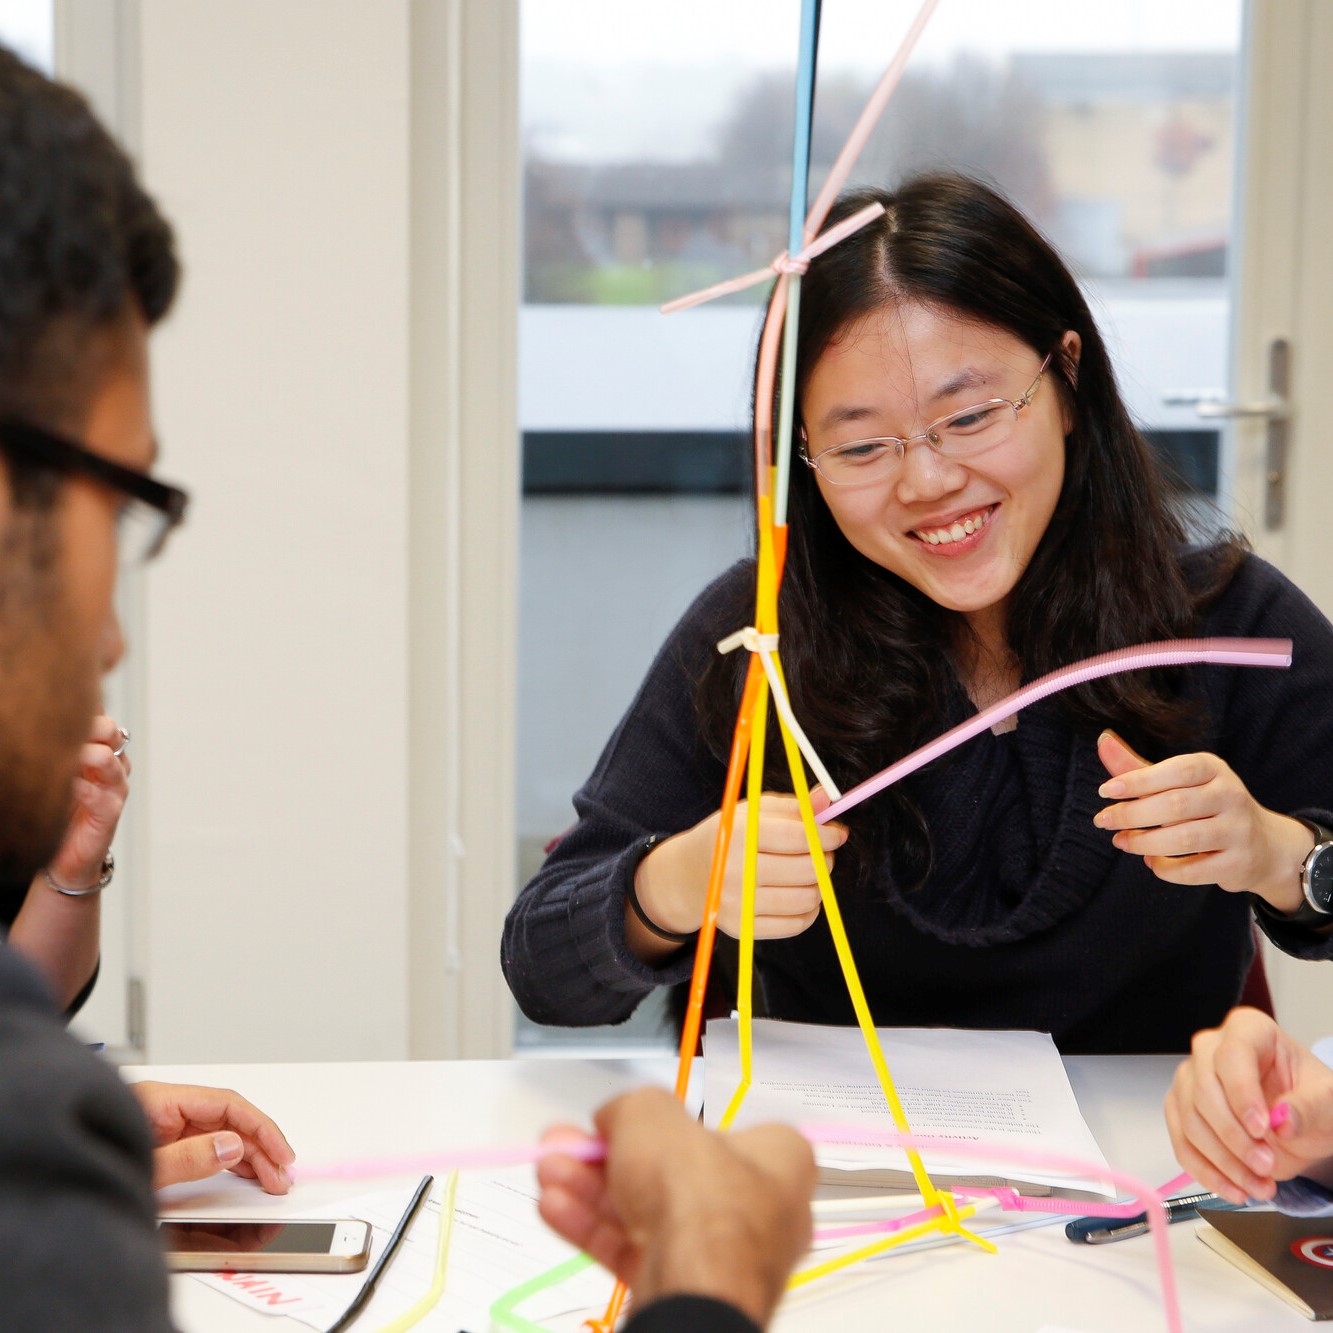 A student engaging in mock assessment centre activity (building a structure with straws) with employer representatives observing